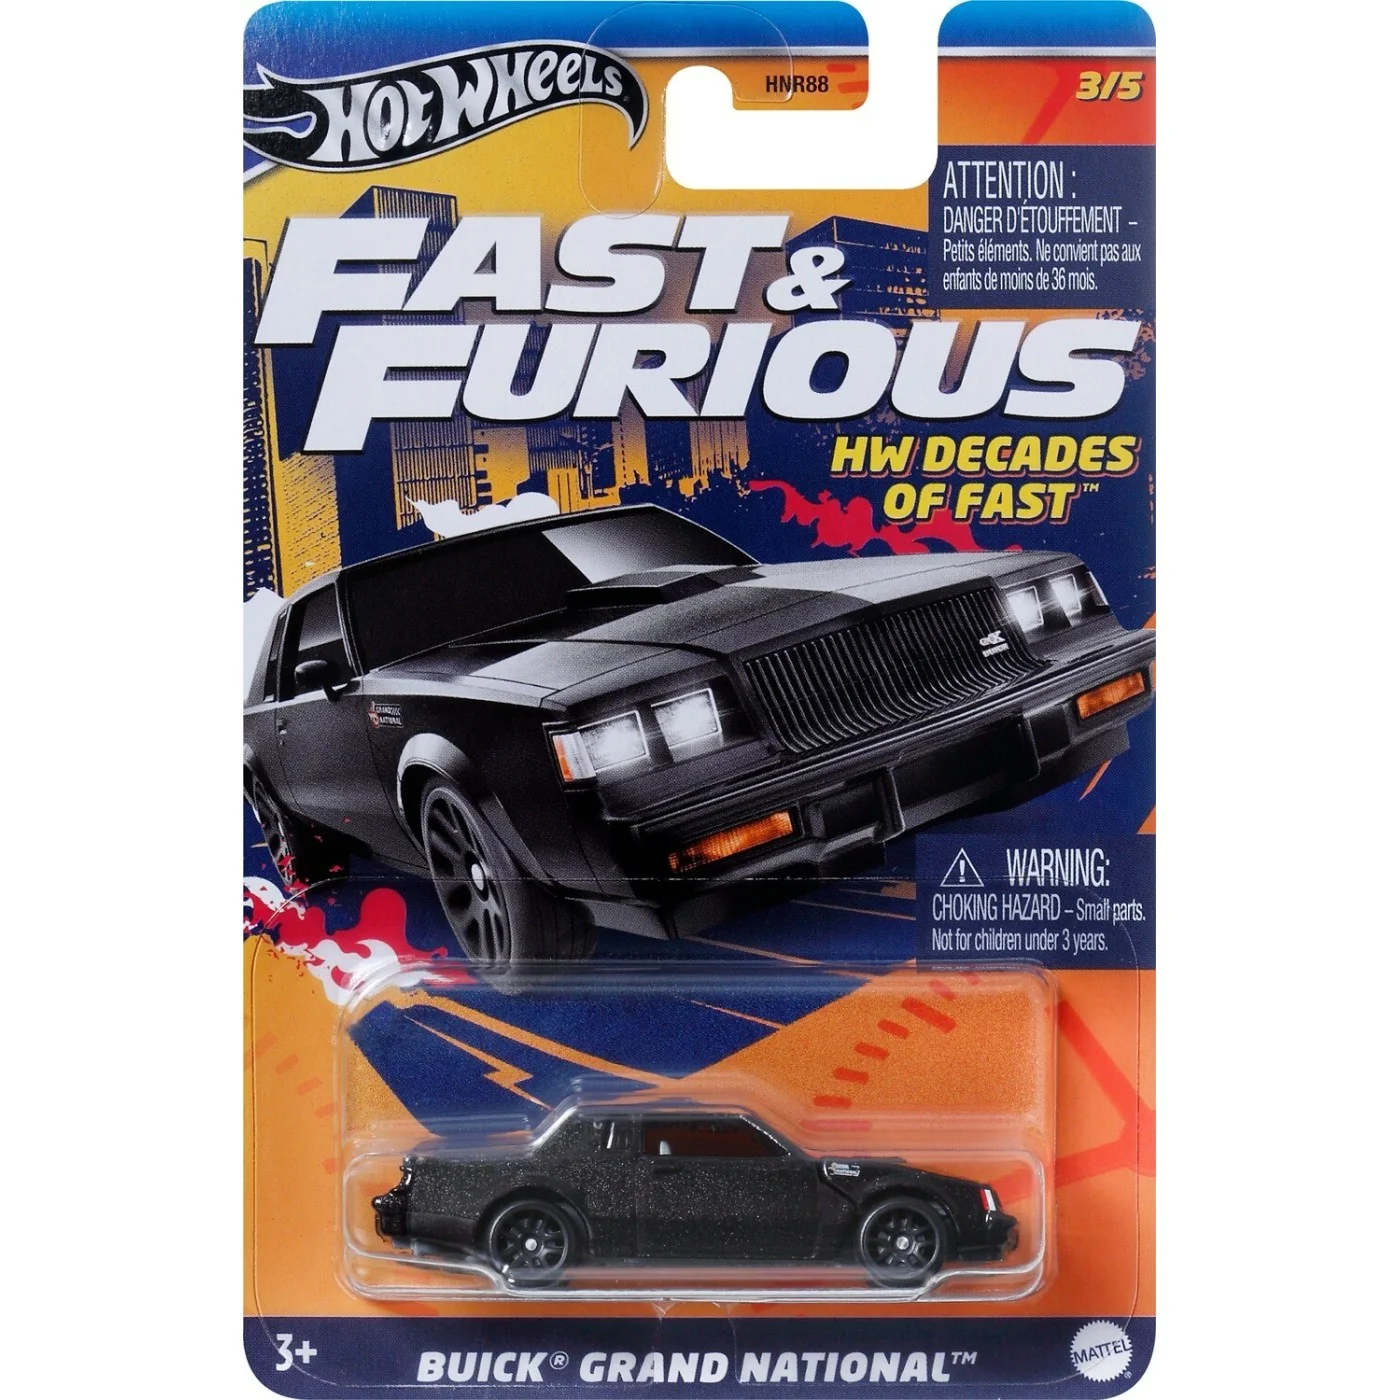 Mattel Hot Wheels - Fast And Furious, Decades of Fast, Buick Grand National Vehicle 4/5 HRW43 (HNR88)